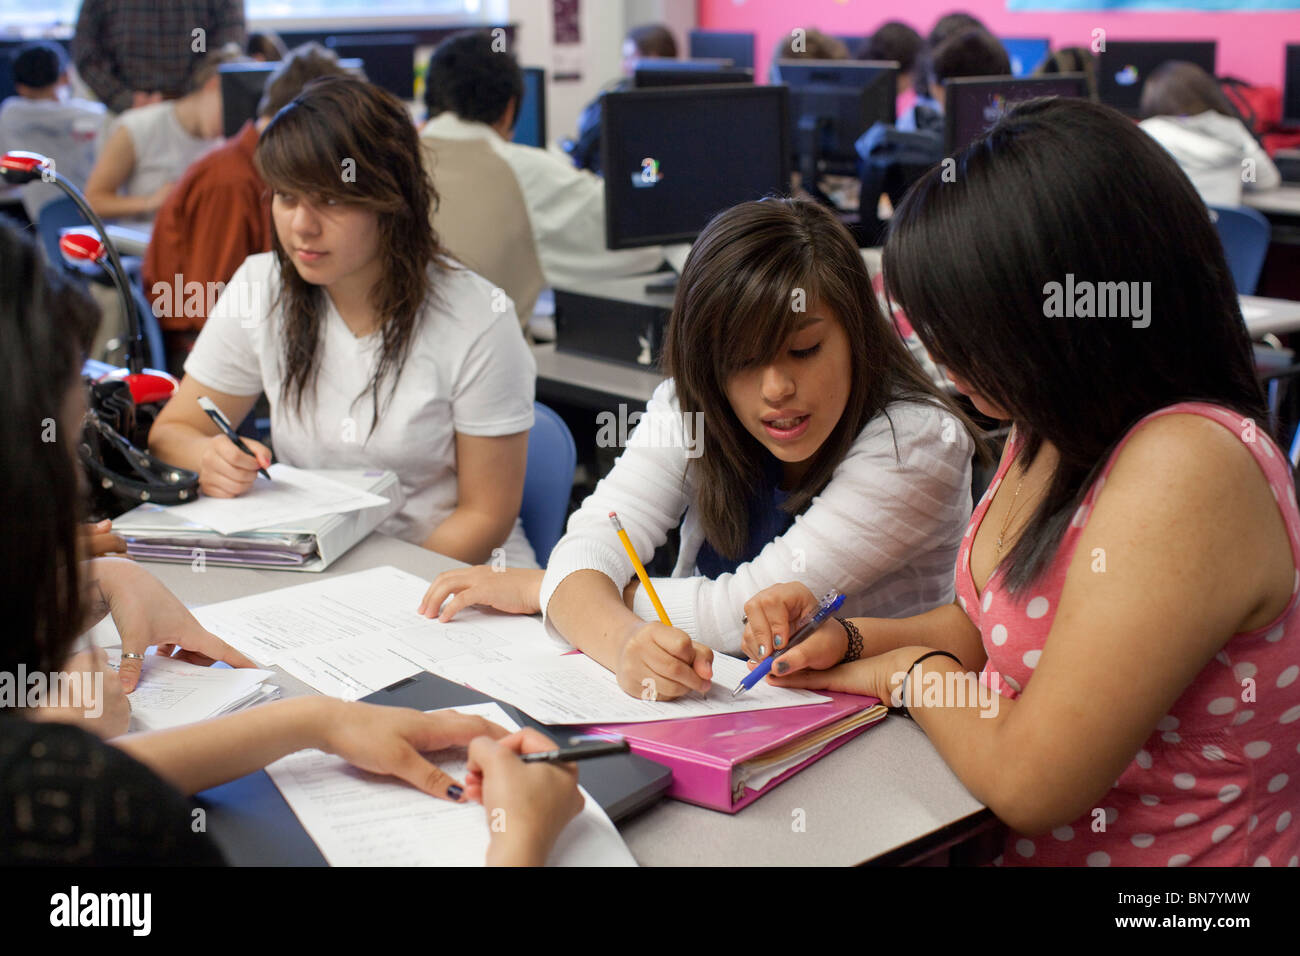 Hispanic high school girls work together on assignment in English class Stock Photo